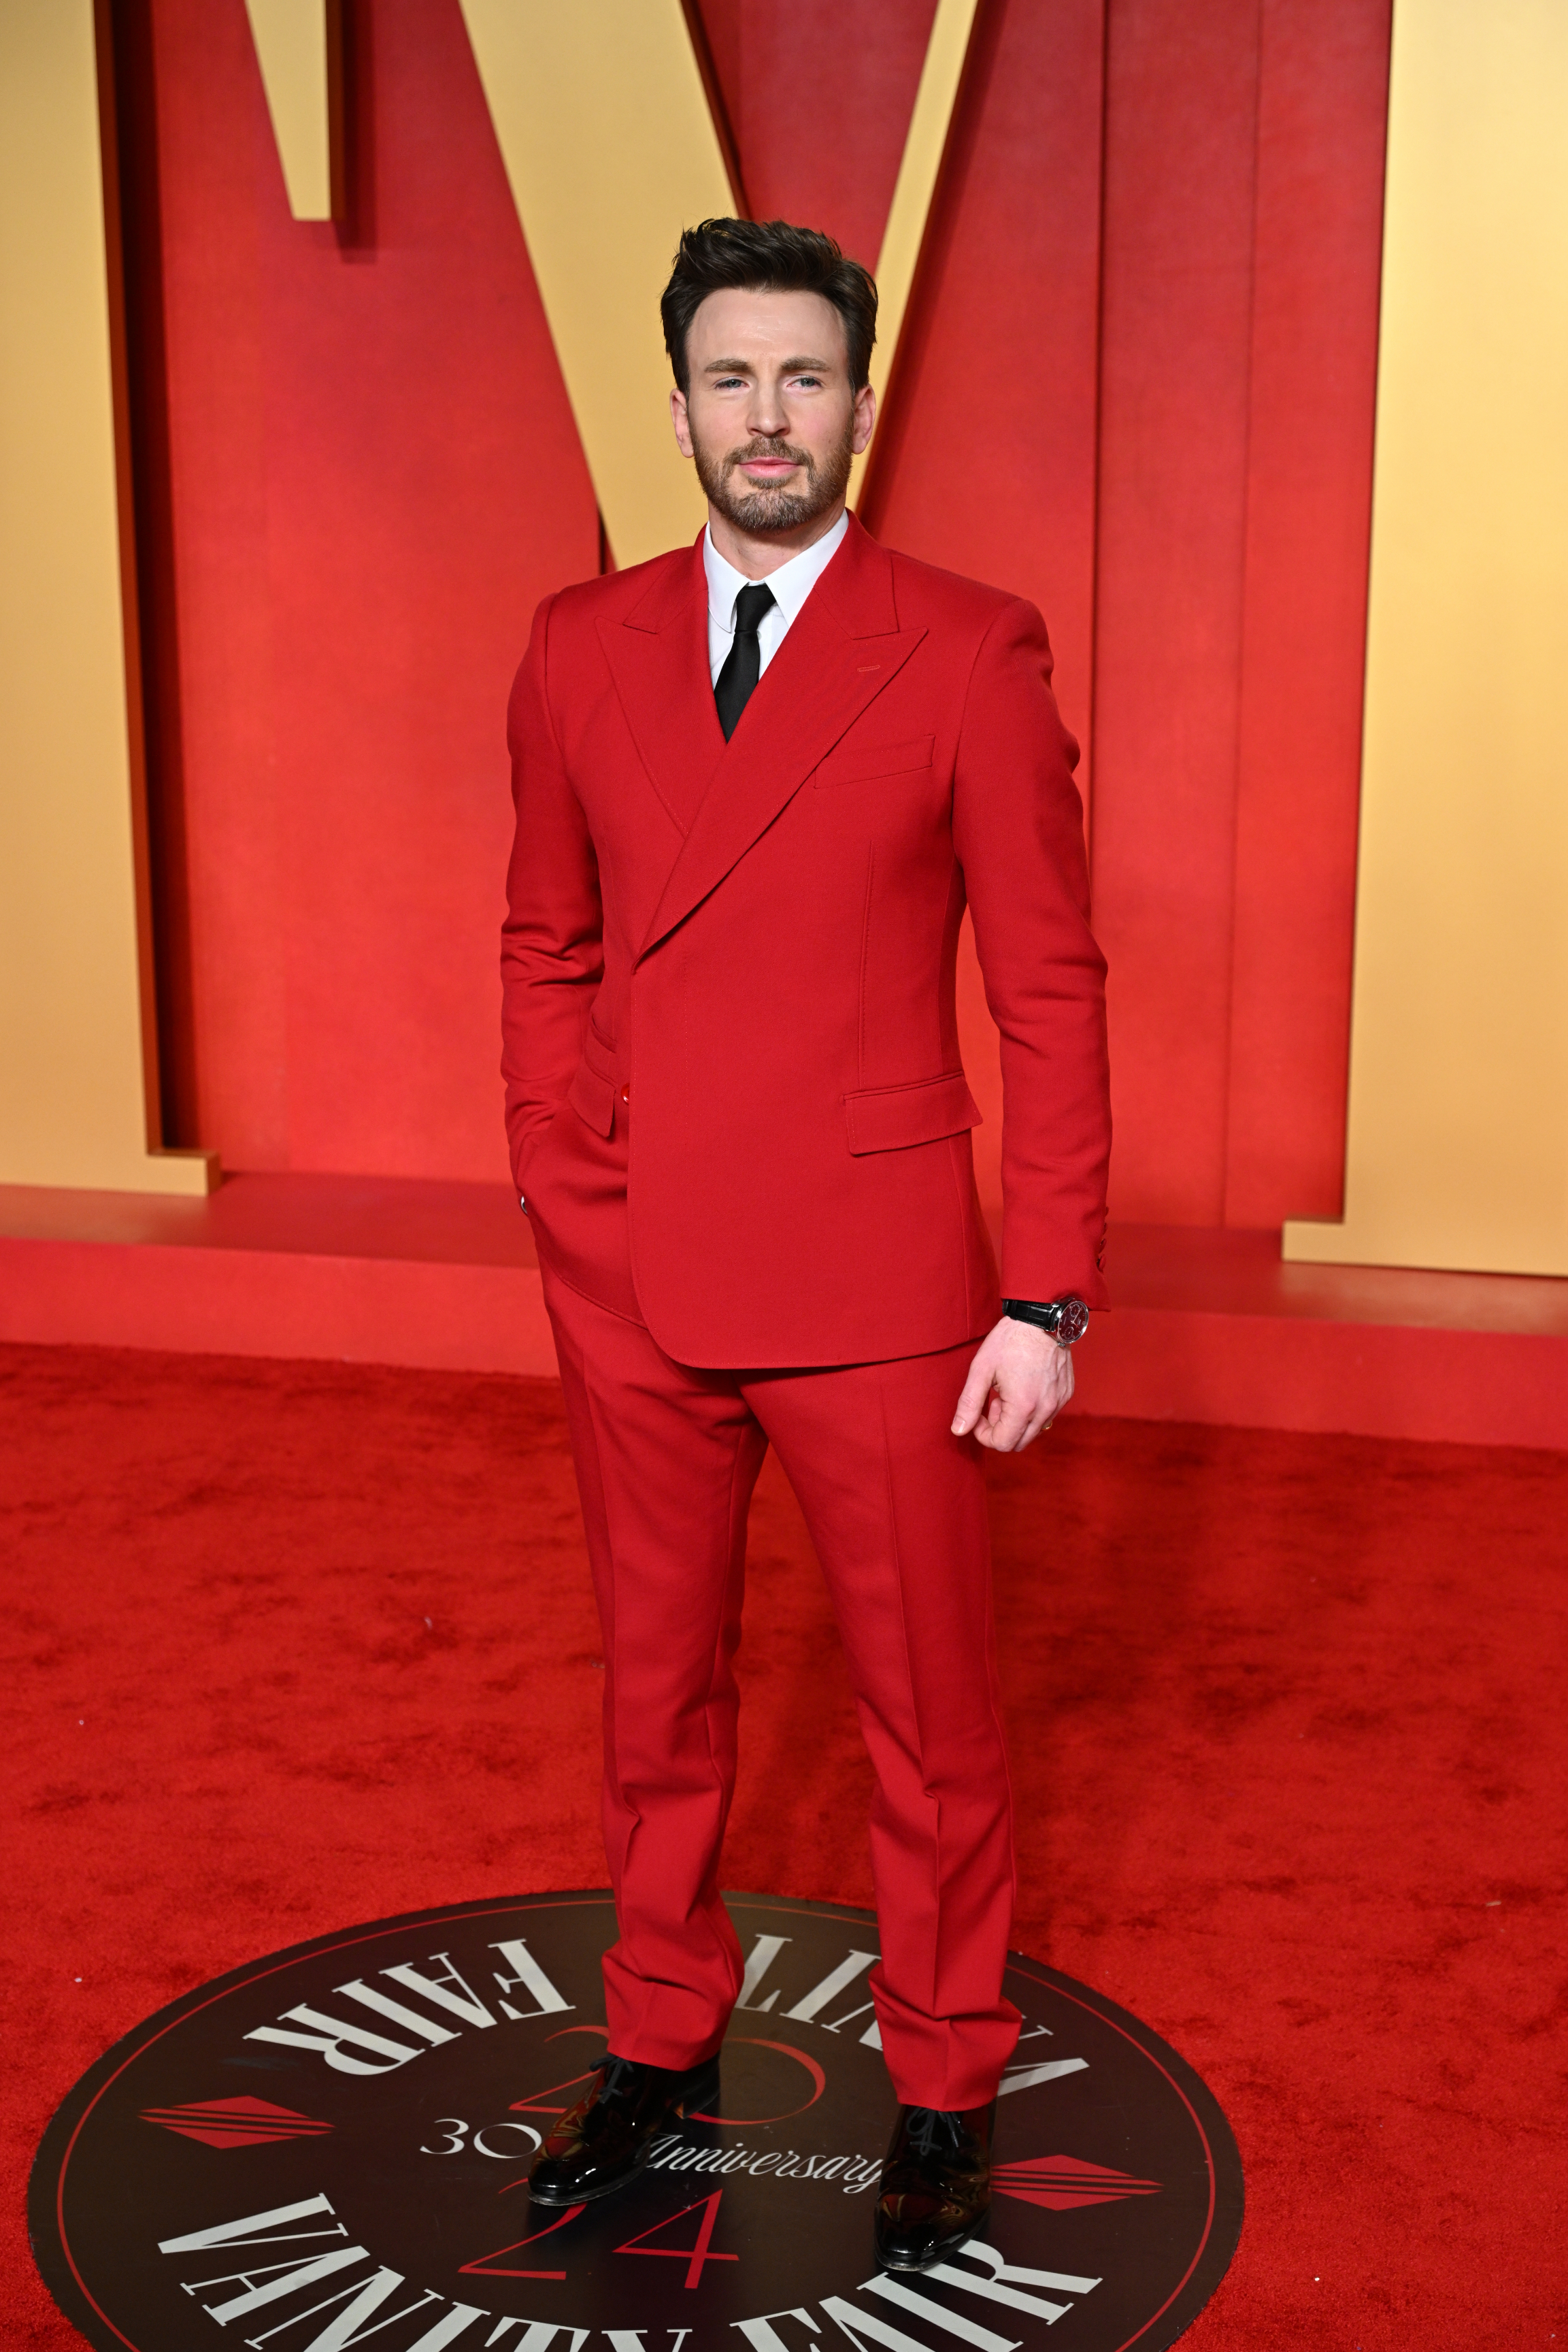 Chris in a tailored red suit standing on event carpet